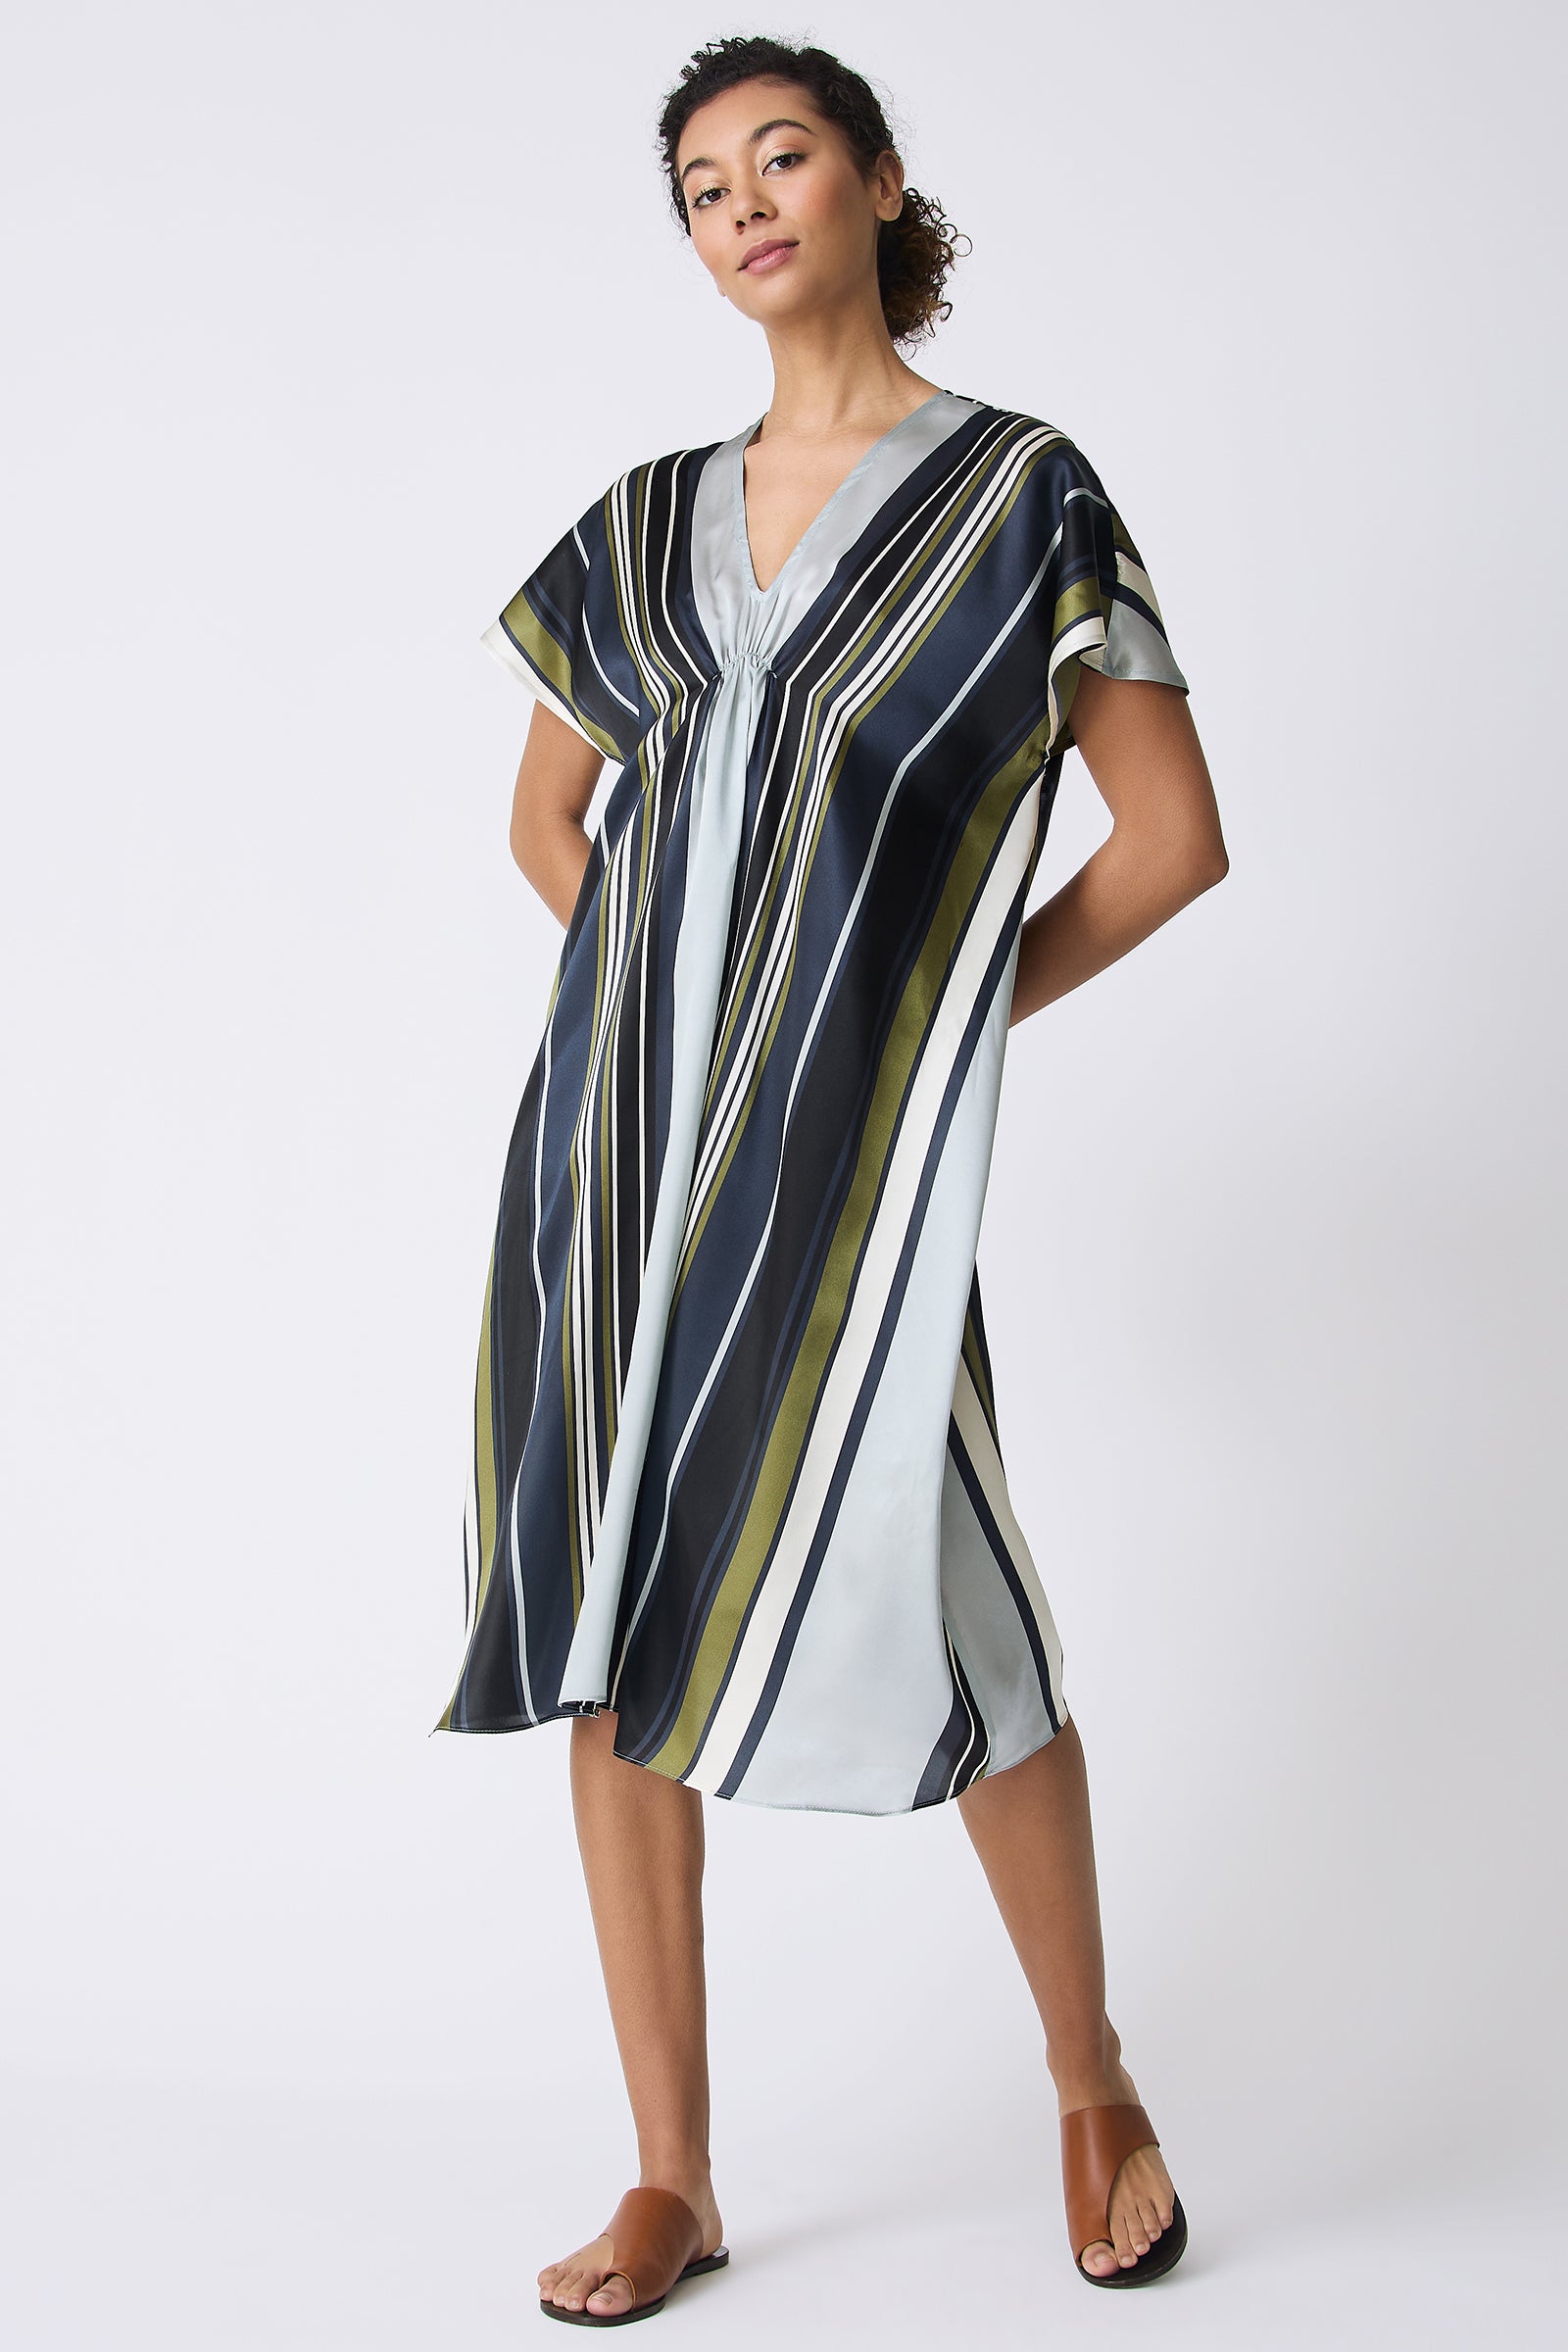 Kal Rieman Vanna Gather Front Dress in Multi Stripe on model full front view